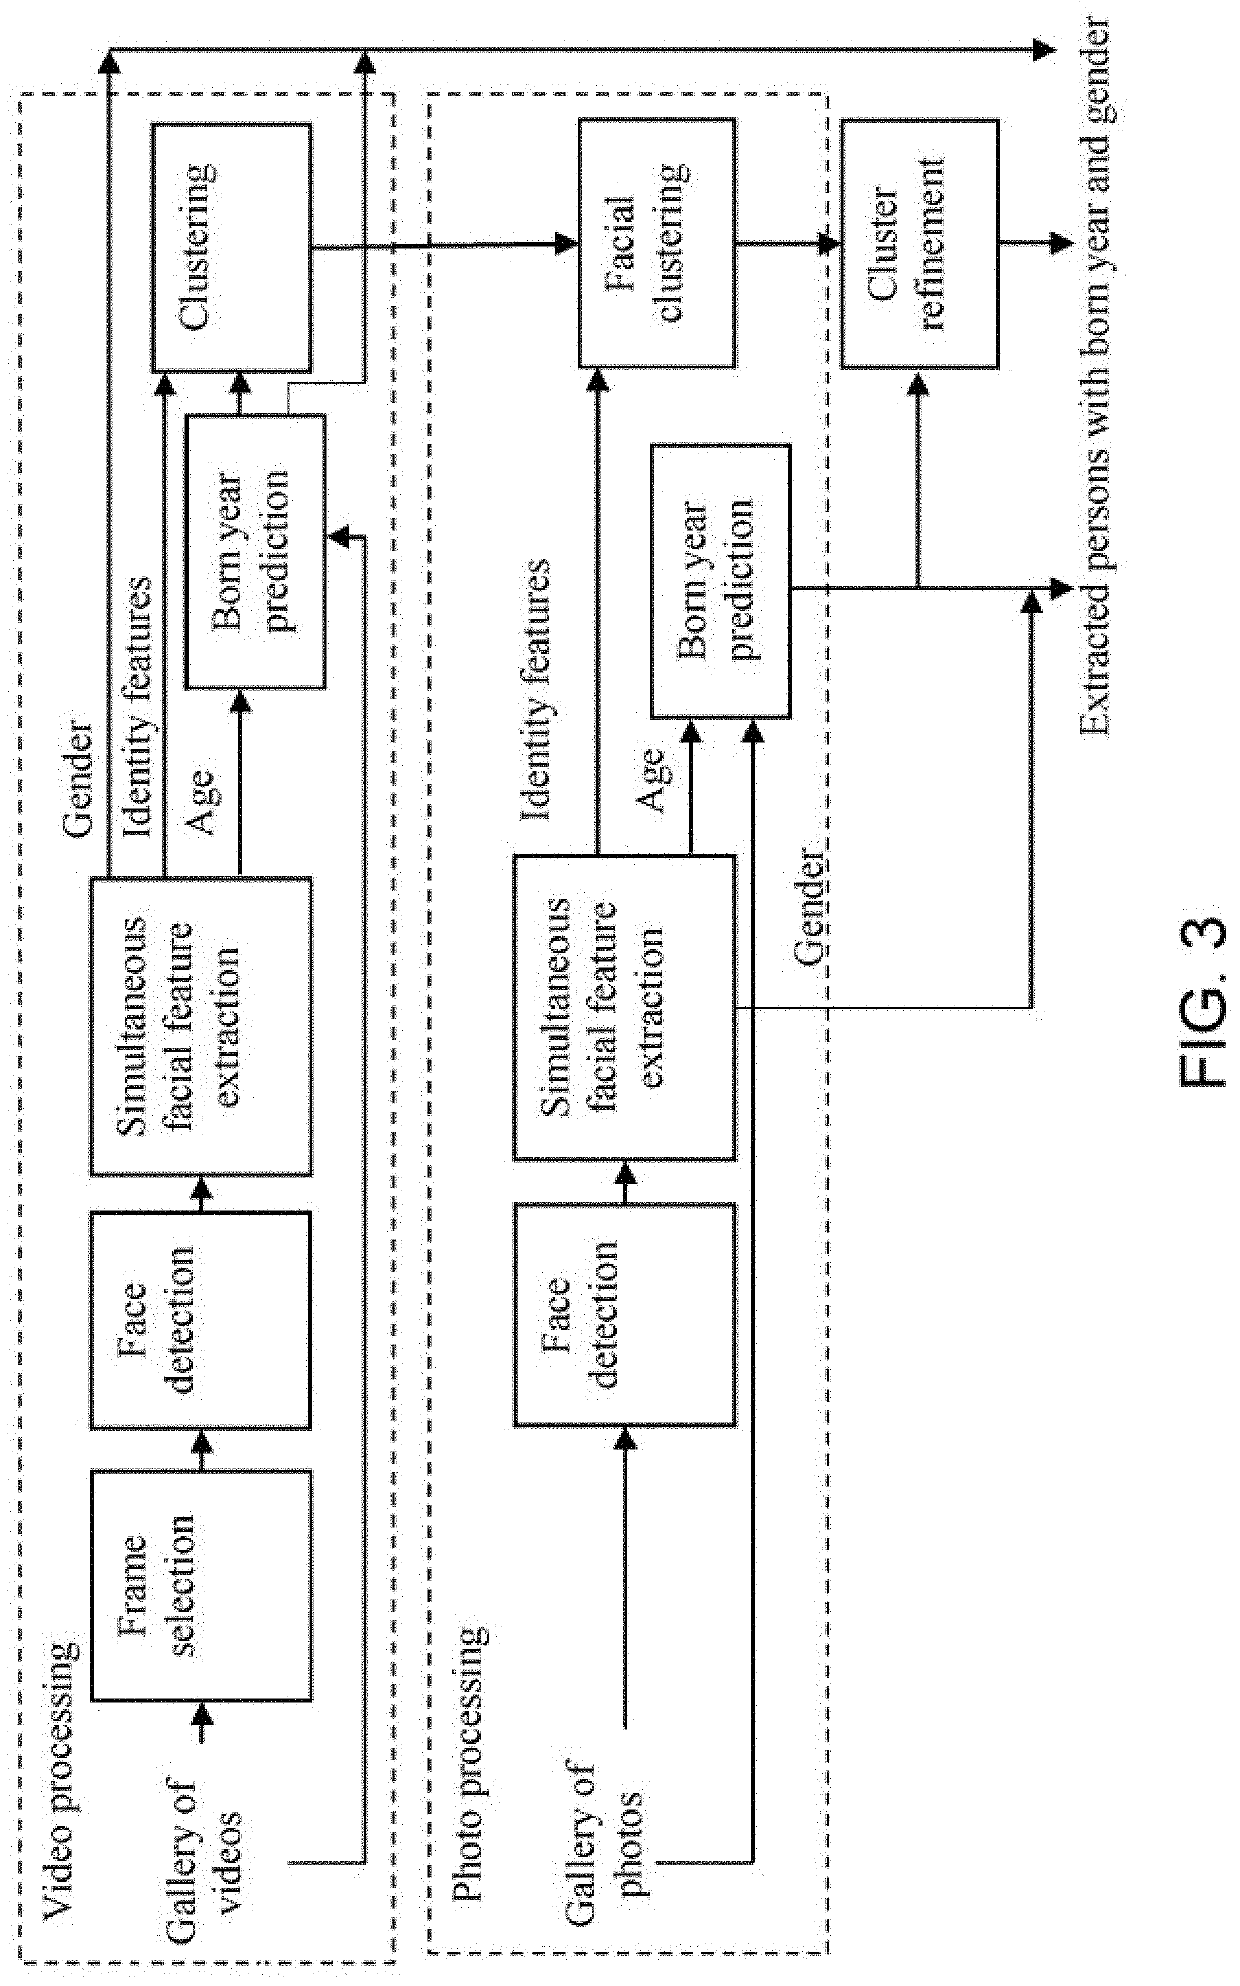 Simultaneous recognition of facial attributes and identity in organizing photo albums